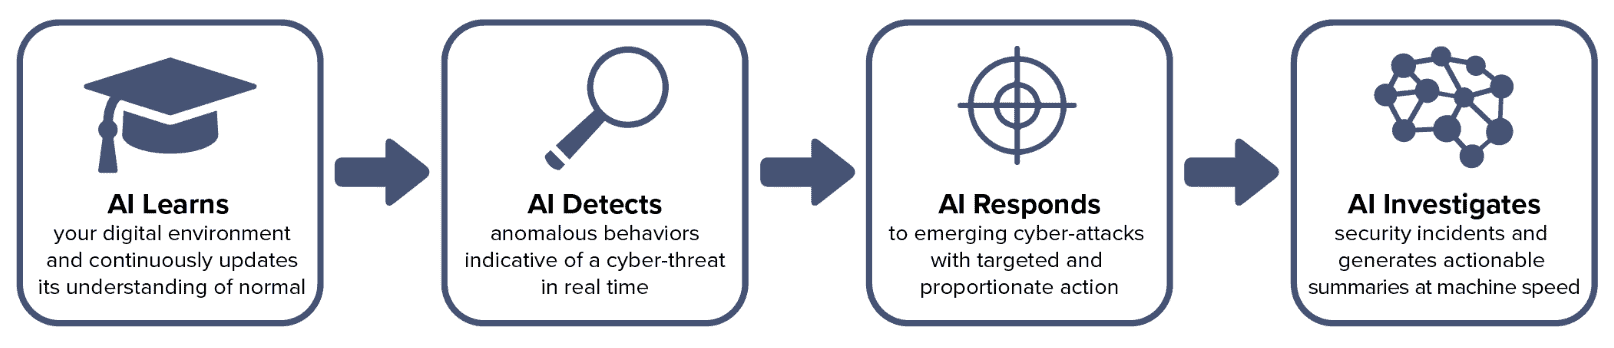 Darktrace IPO: how does the company's cyber AI platform work? This graphic shows how Darktrace's Cyber AI platform works